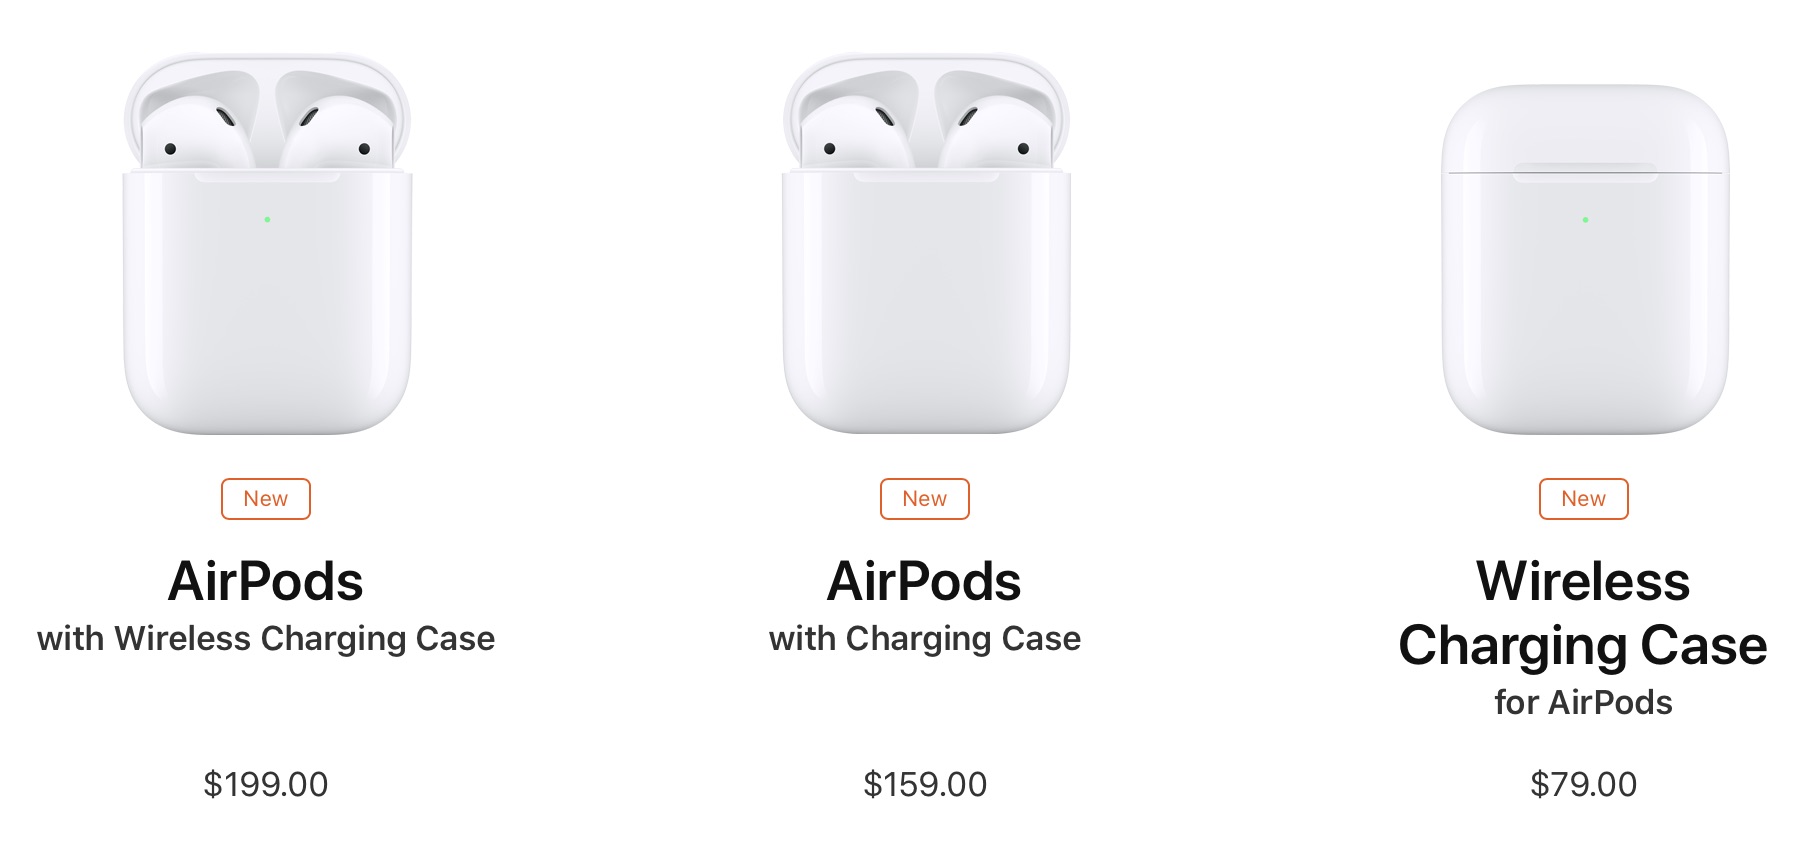 Thinking of buying AirPods 2? Here's how the new version compares to